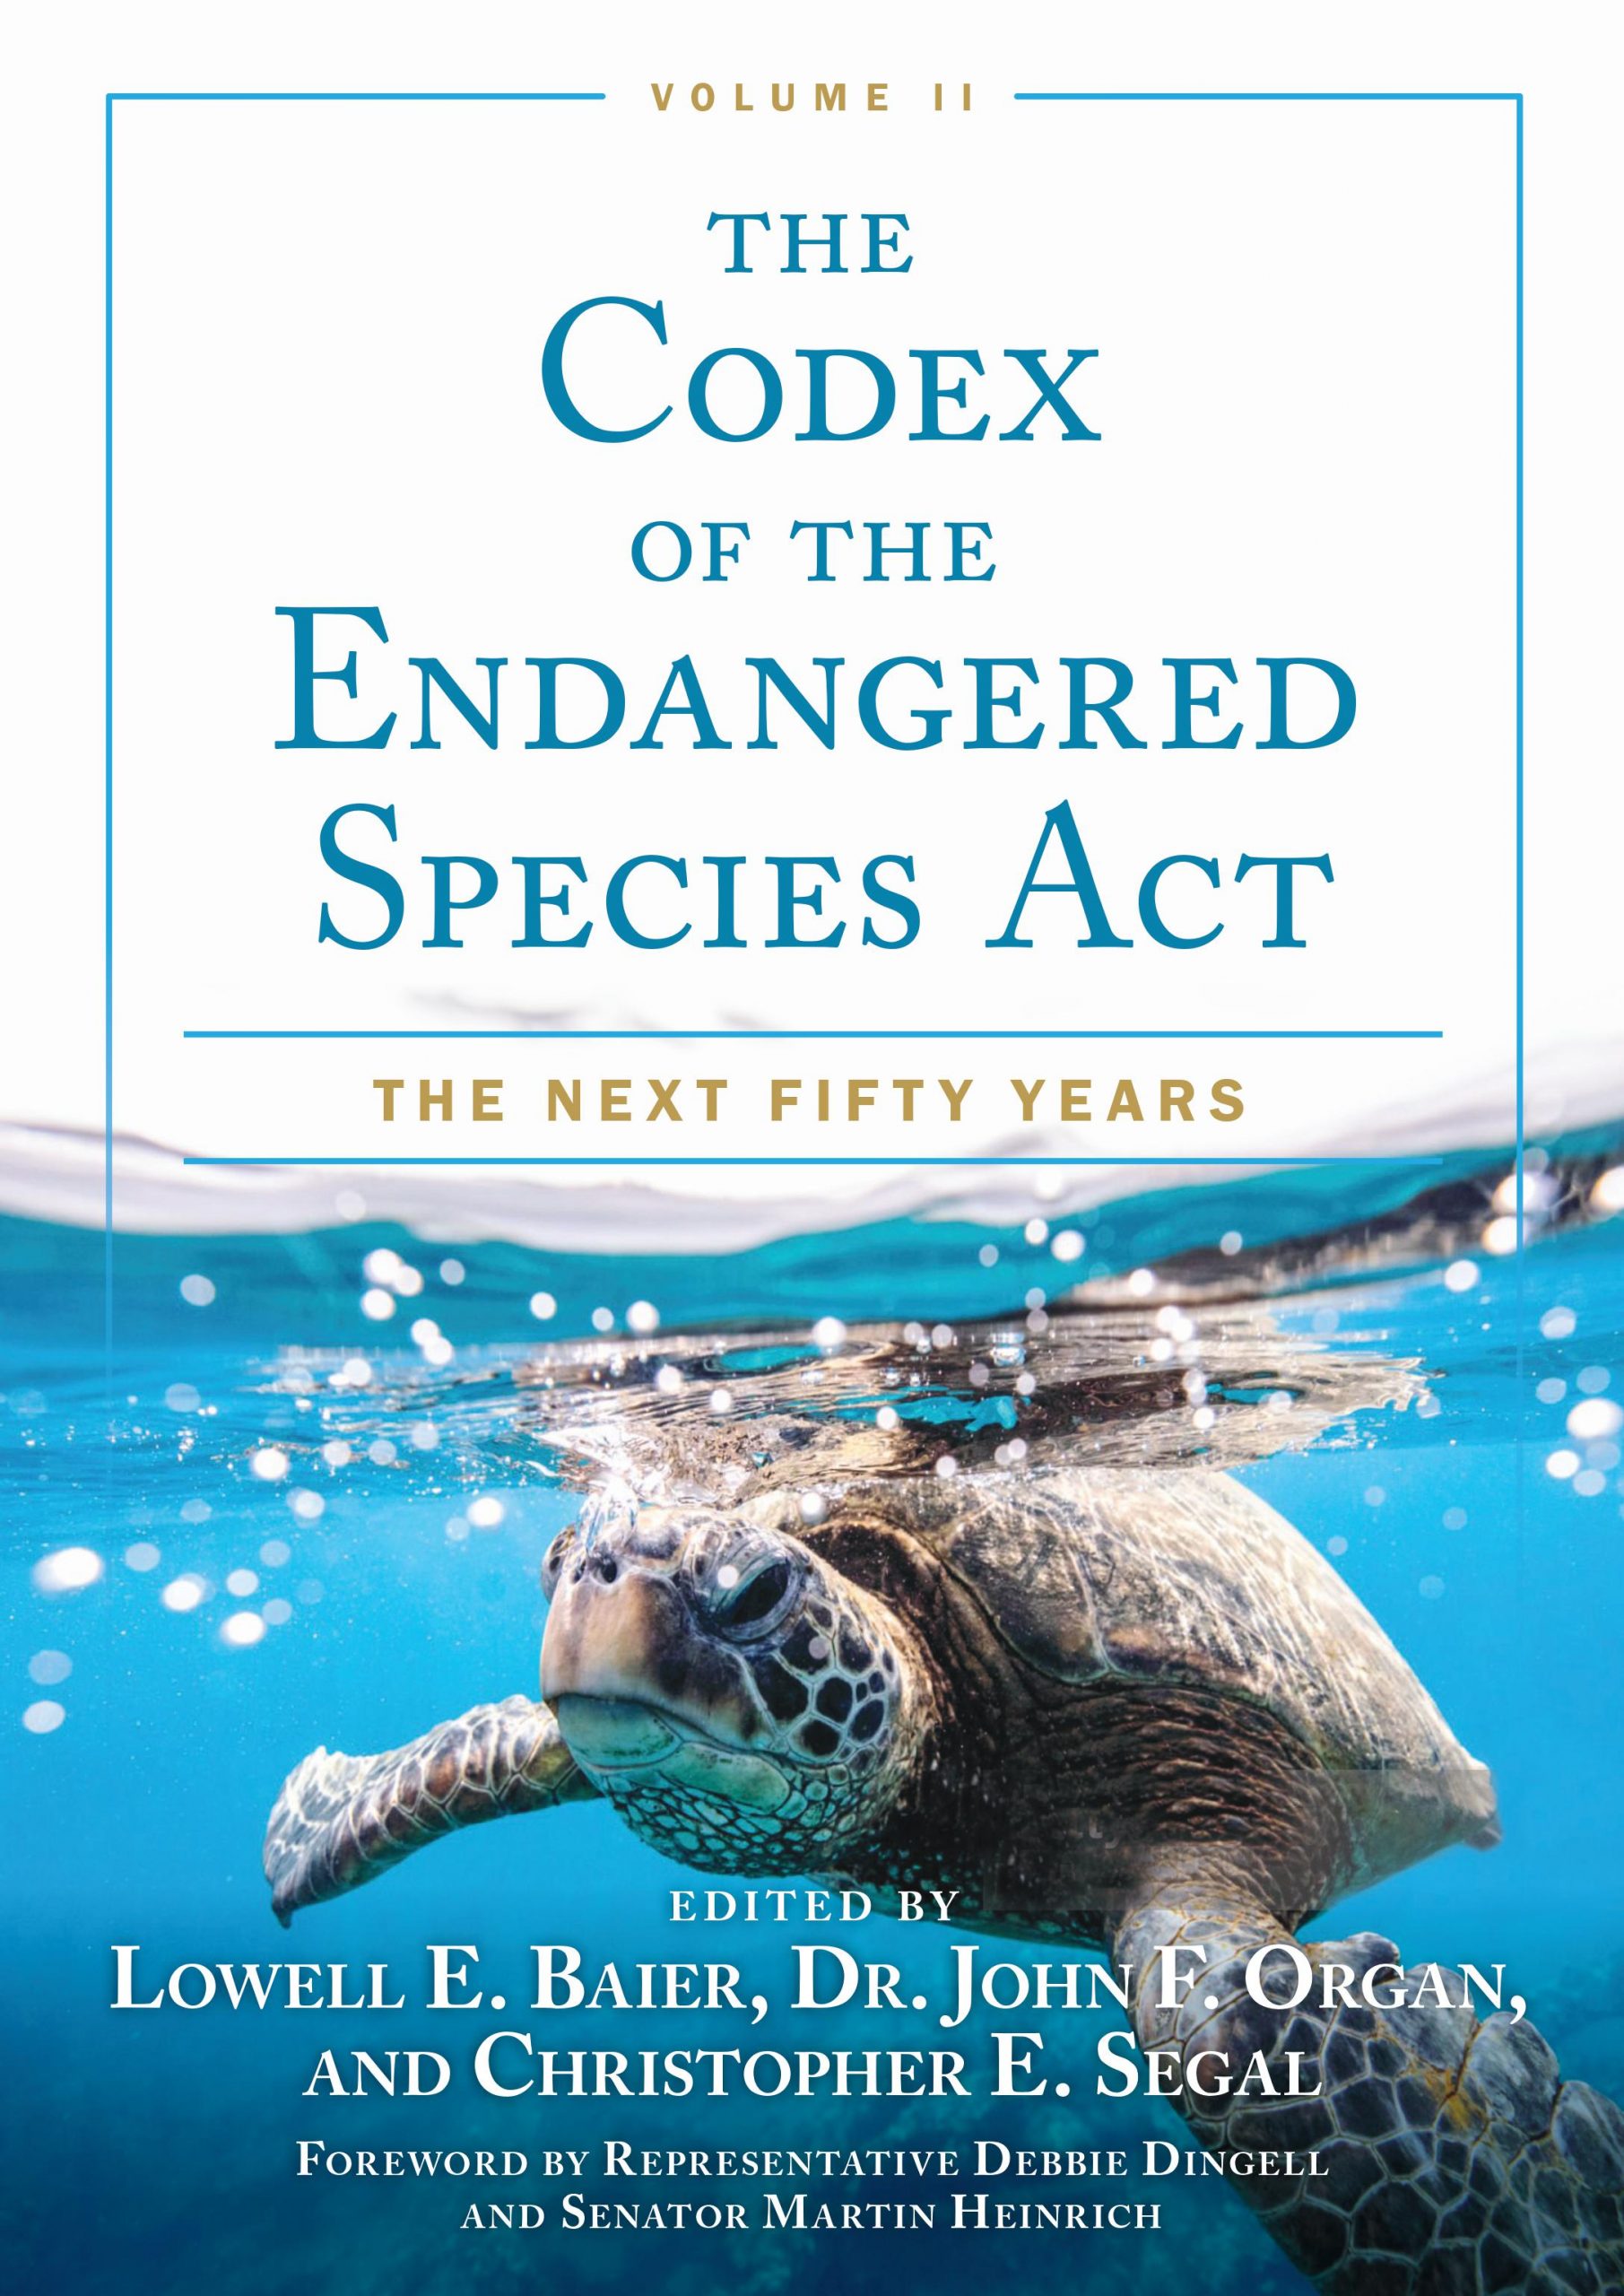 The Codex of the Endangered Species Act, Volumes II